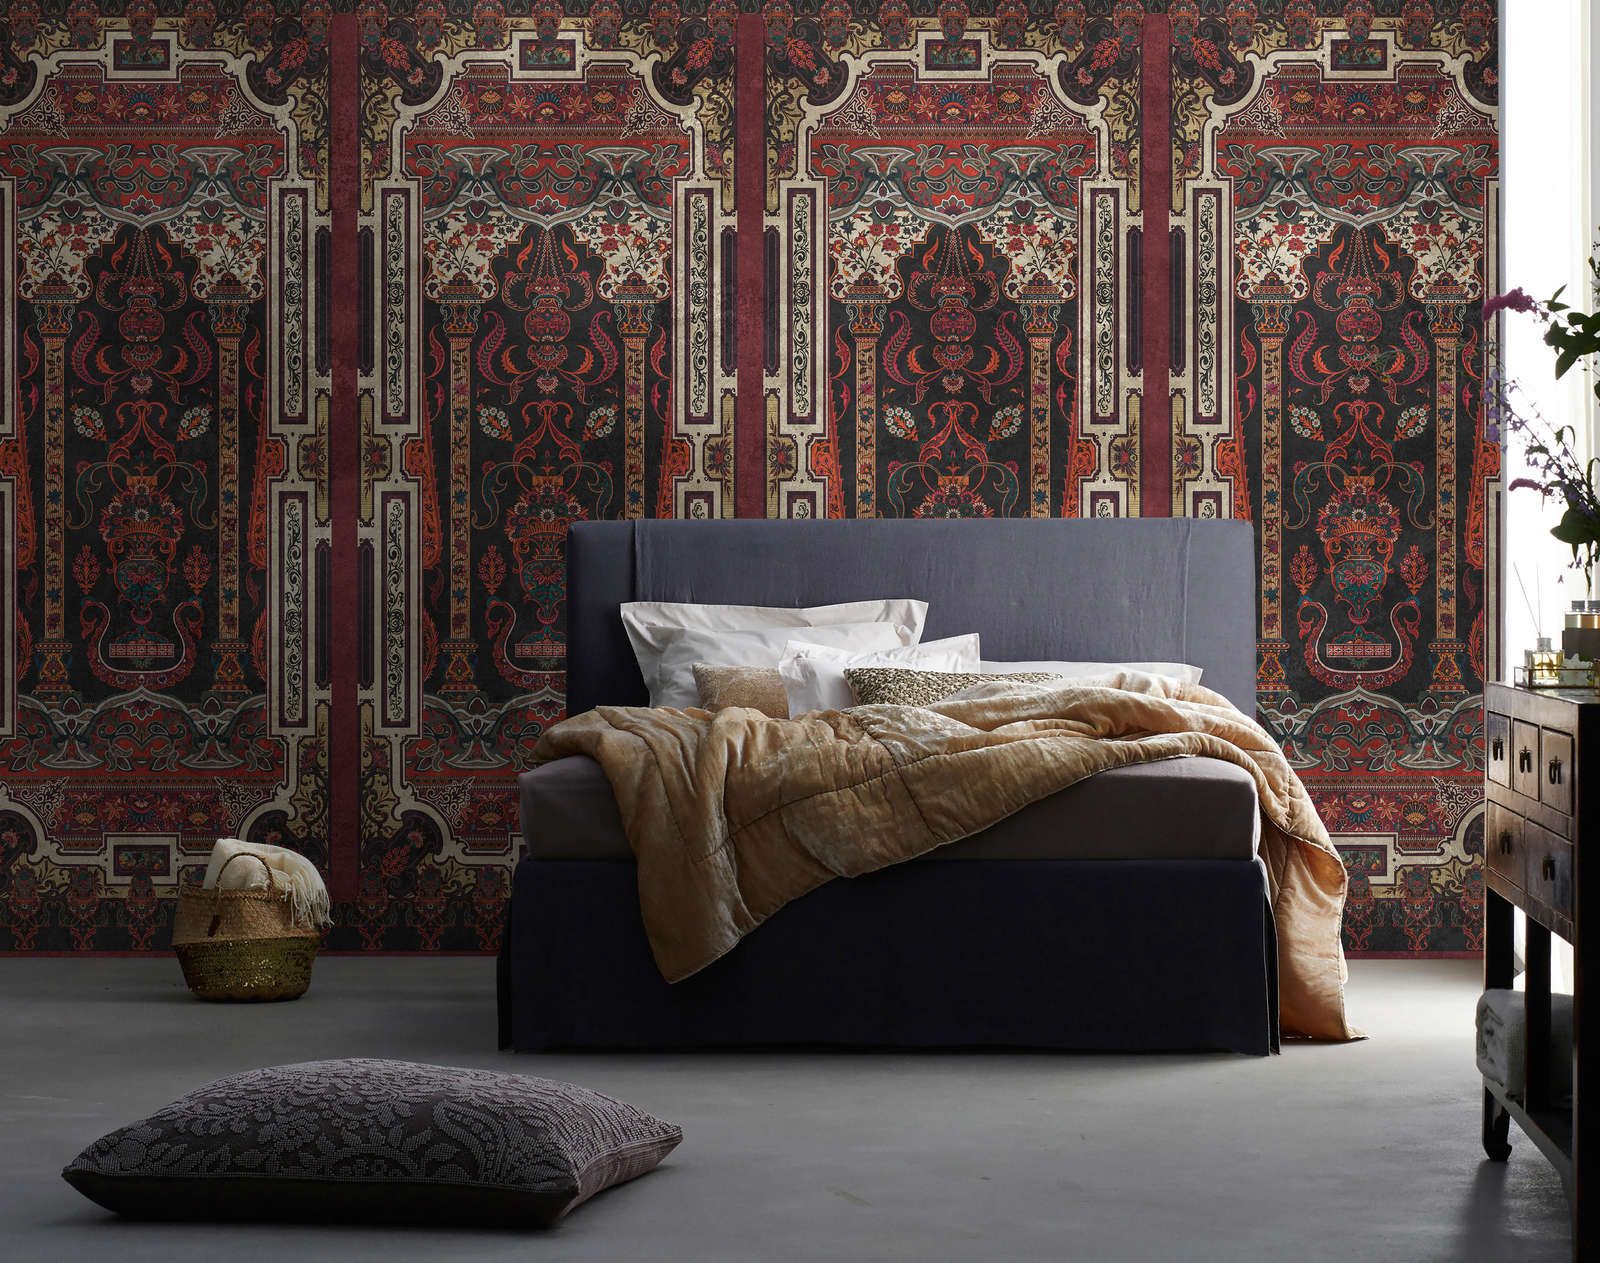             Photo wallpaper »karim« - Ornamental panelling with vintage plaster texture - Dark red | Smooth, slightly pearlescent non-woven fabric
        